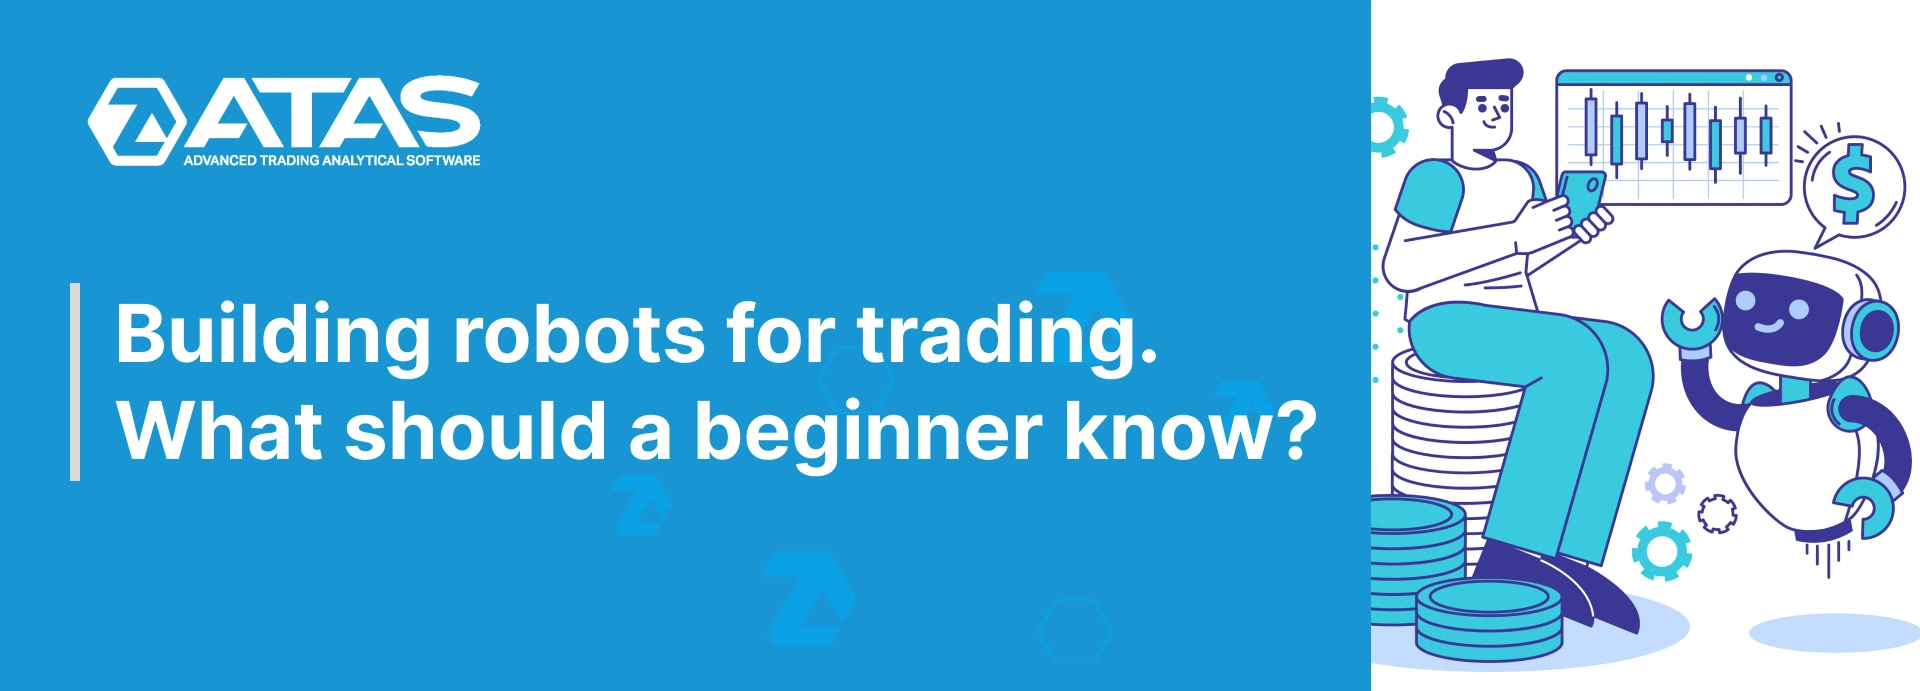 Building robots for trading. What should a beginner know